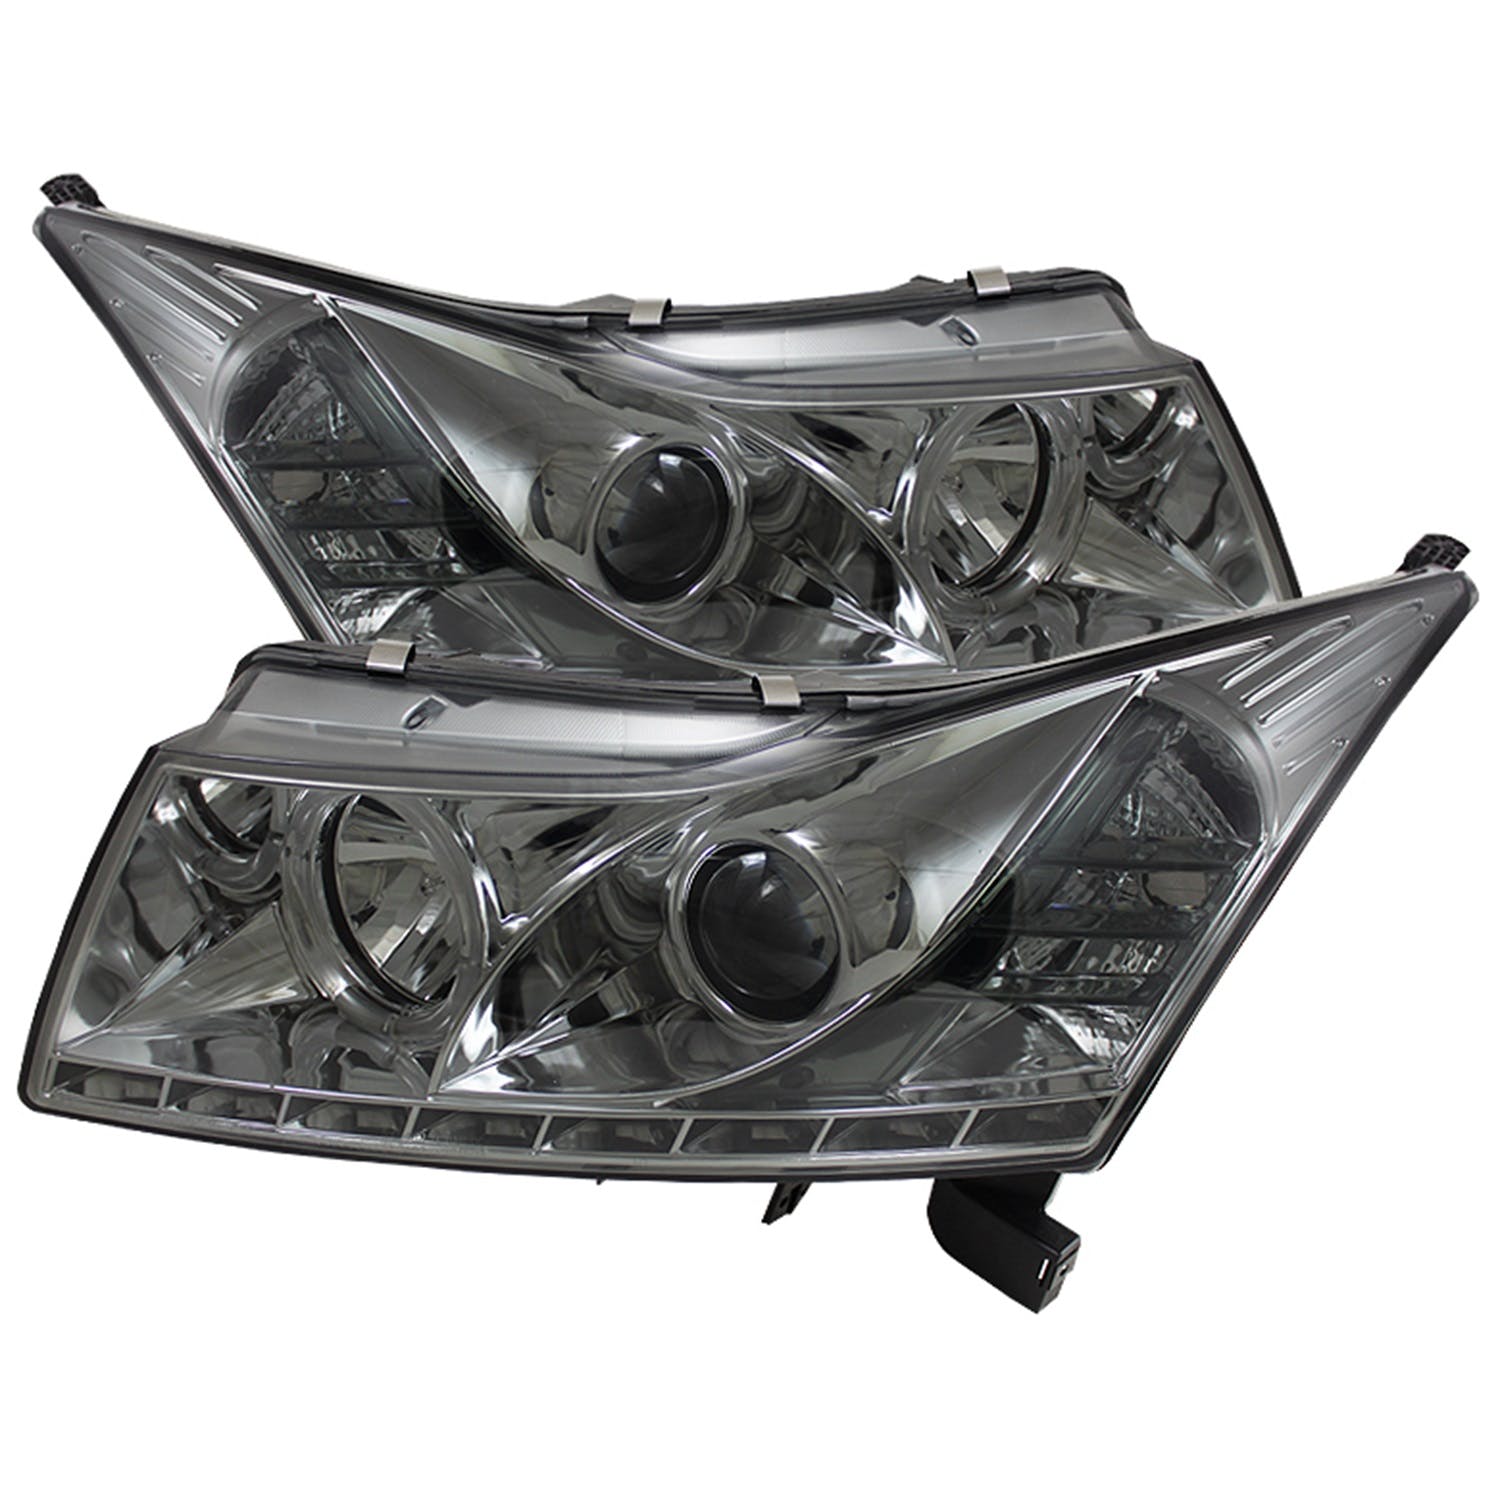 Spyder Auto 5037923 ( SPYDER ) CHEVY CRUZE 11-14 PROJECTOR HEADLIGHTS-LED HALO-DRL-SMOKE-HIGH H1 (IN